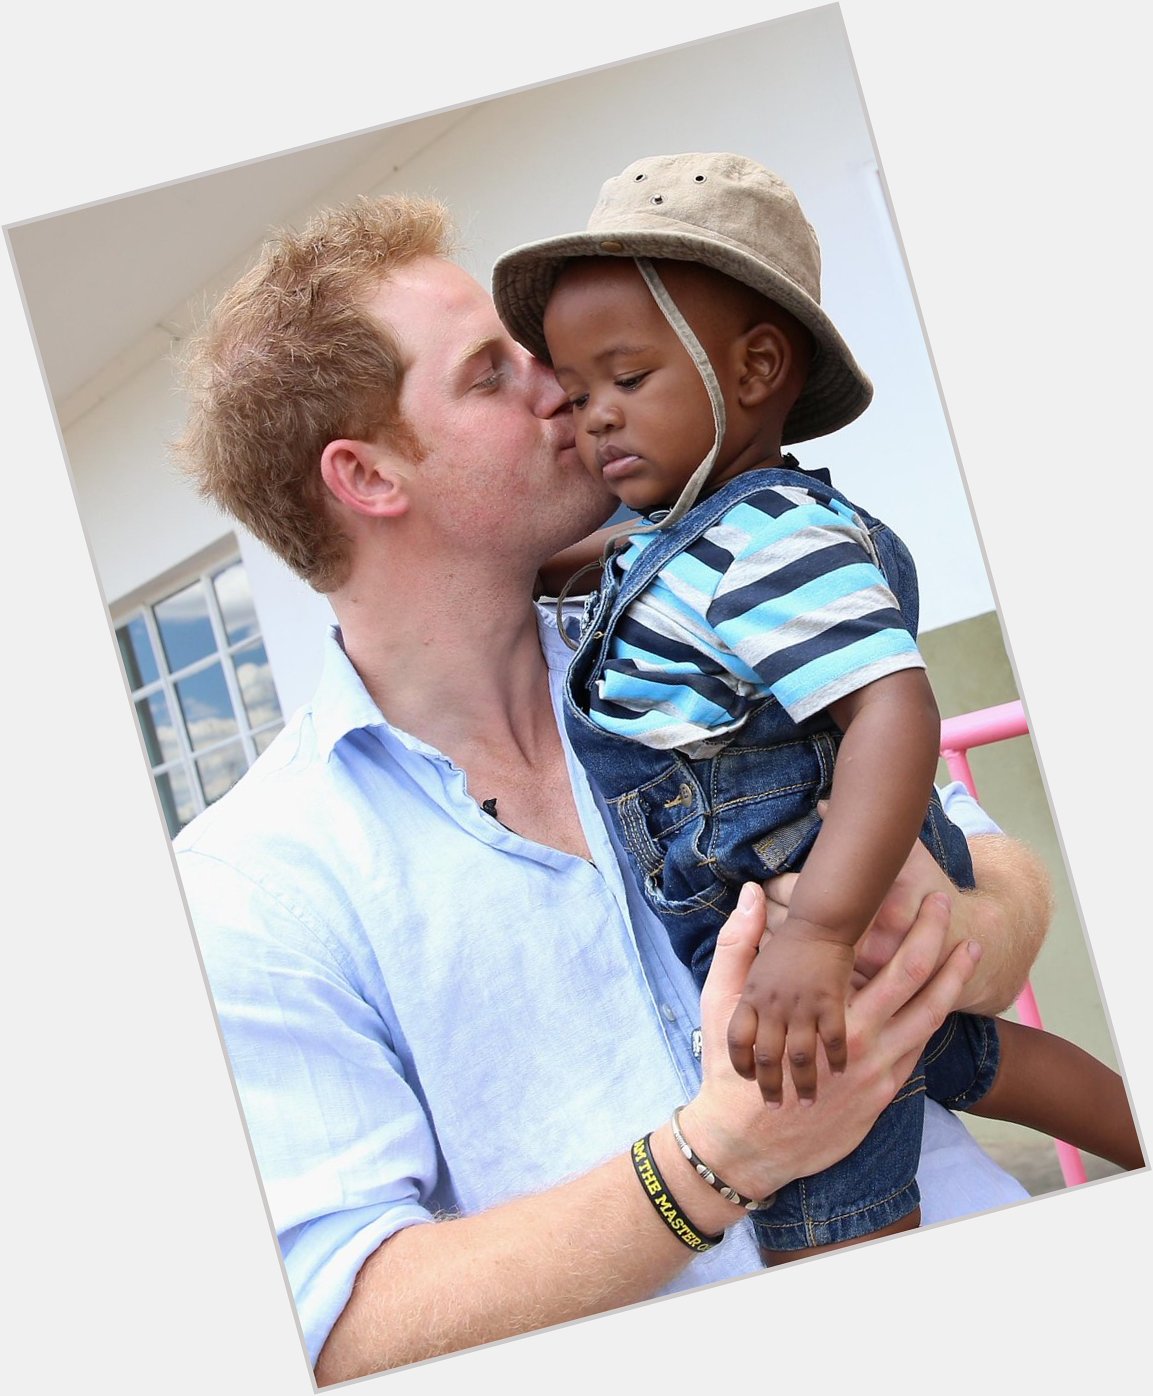 Happy Birthday to the very lovable Prince Harry! Already 31 years old, they grow up so fast! 